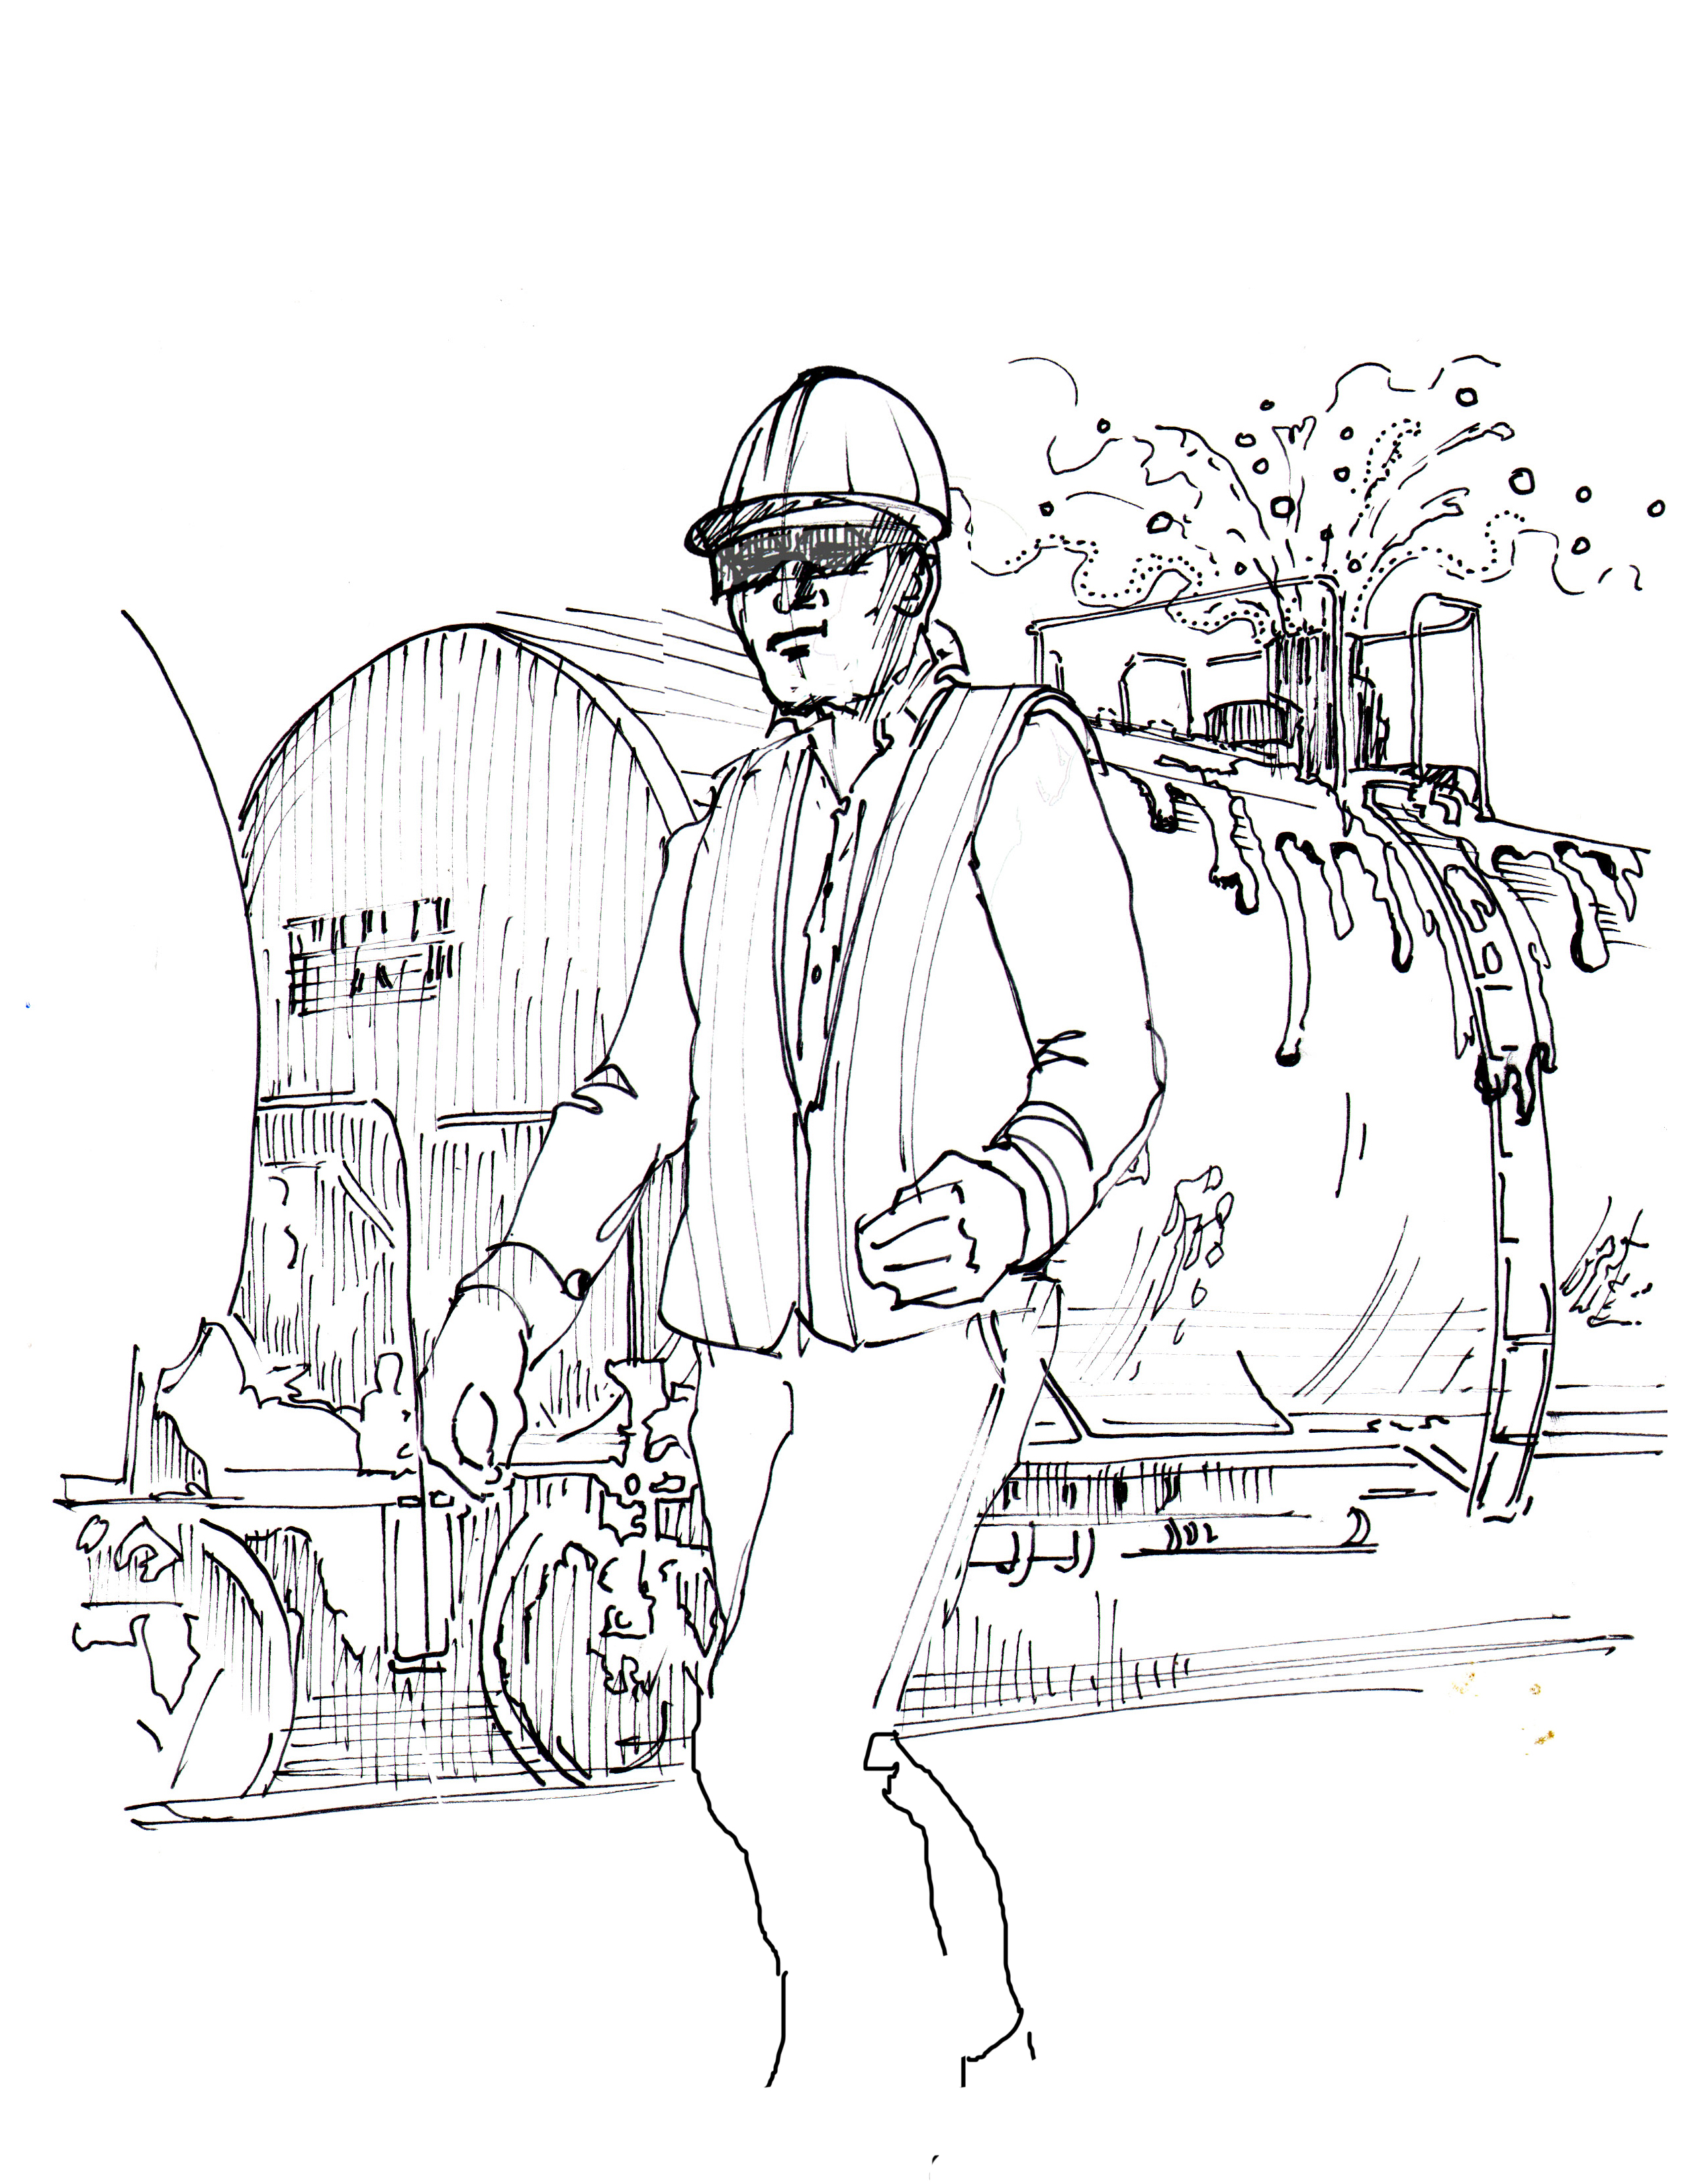 Artwork depicting unsafe situations, and events to avoid, frequently is used in IPH and production safety training. In this hazmat training illustration, an unobservant trainman ignores a hissing leaking tank car.